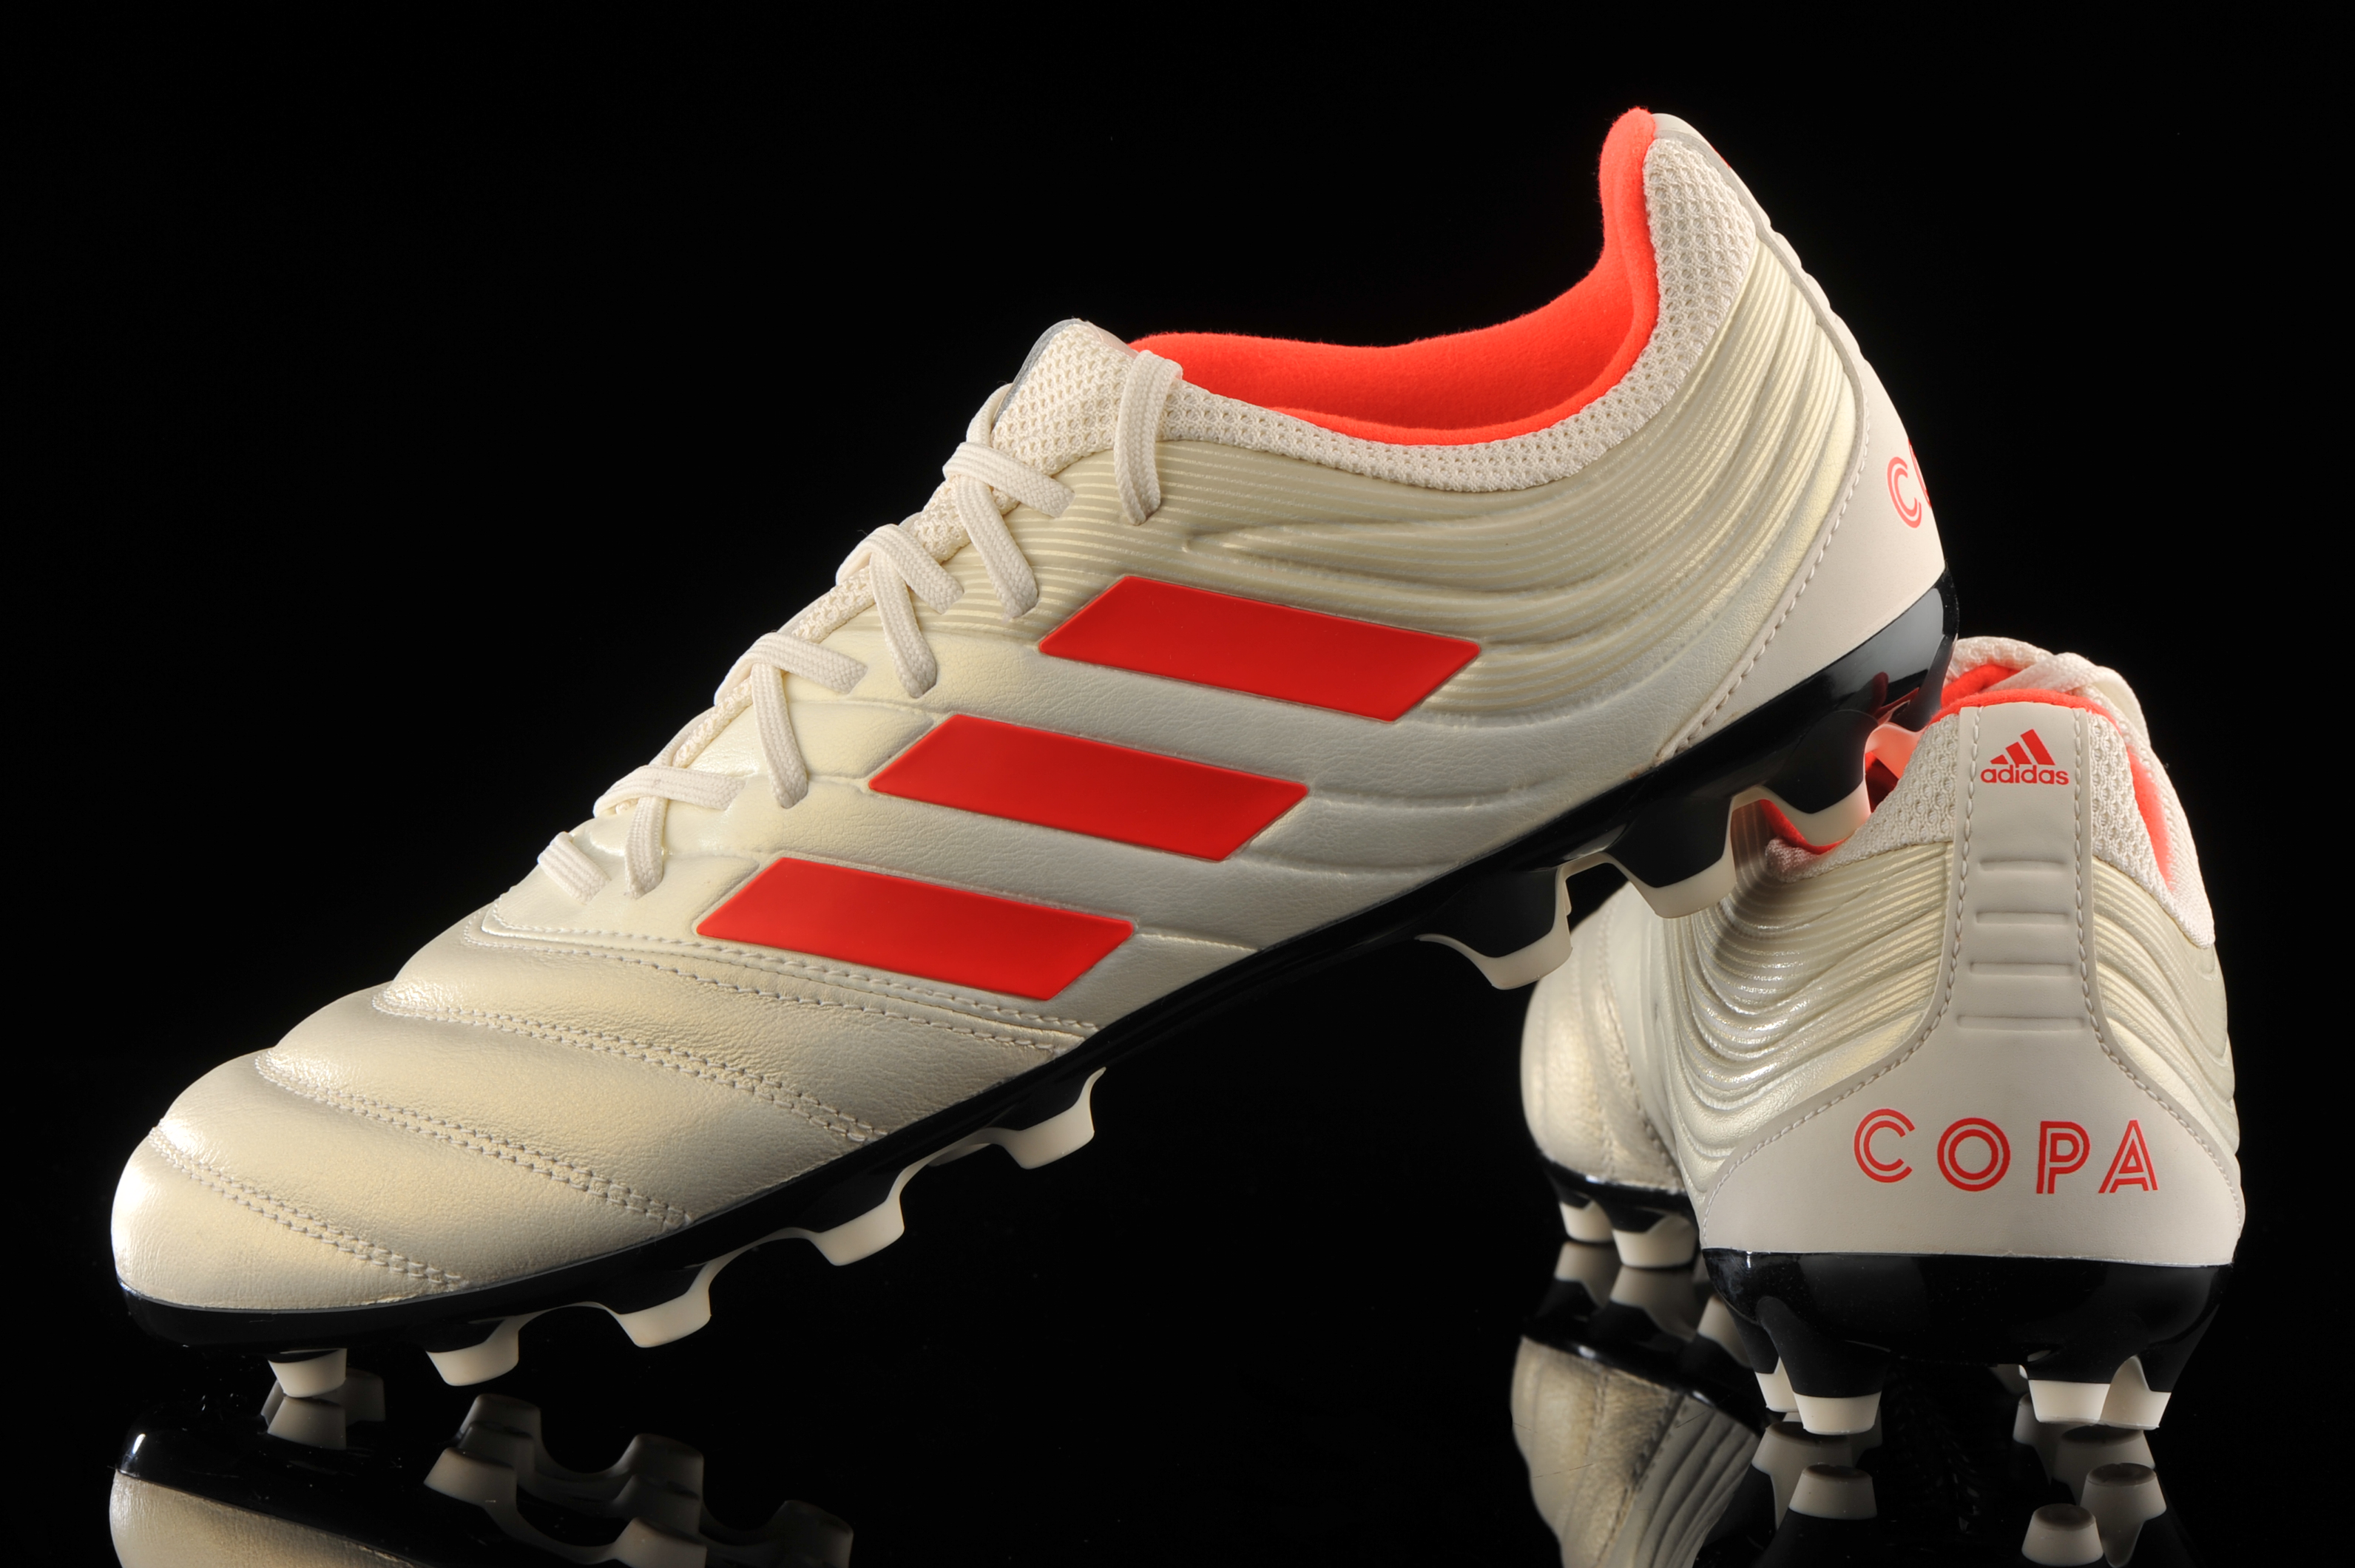 adidas indoor soccer shoes 218